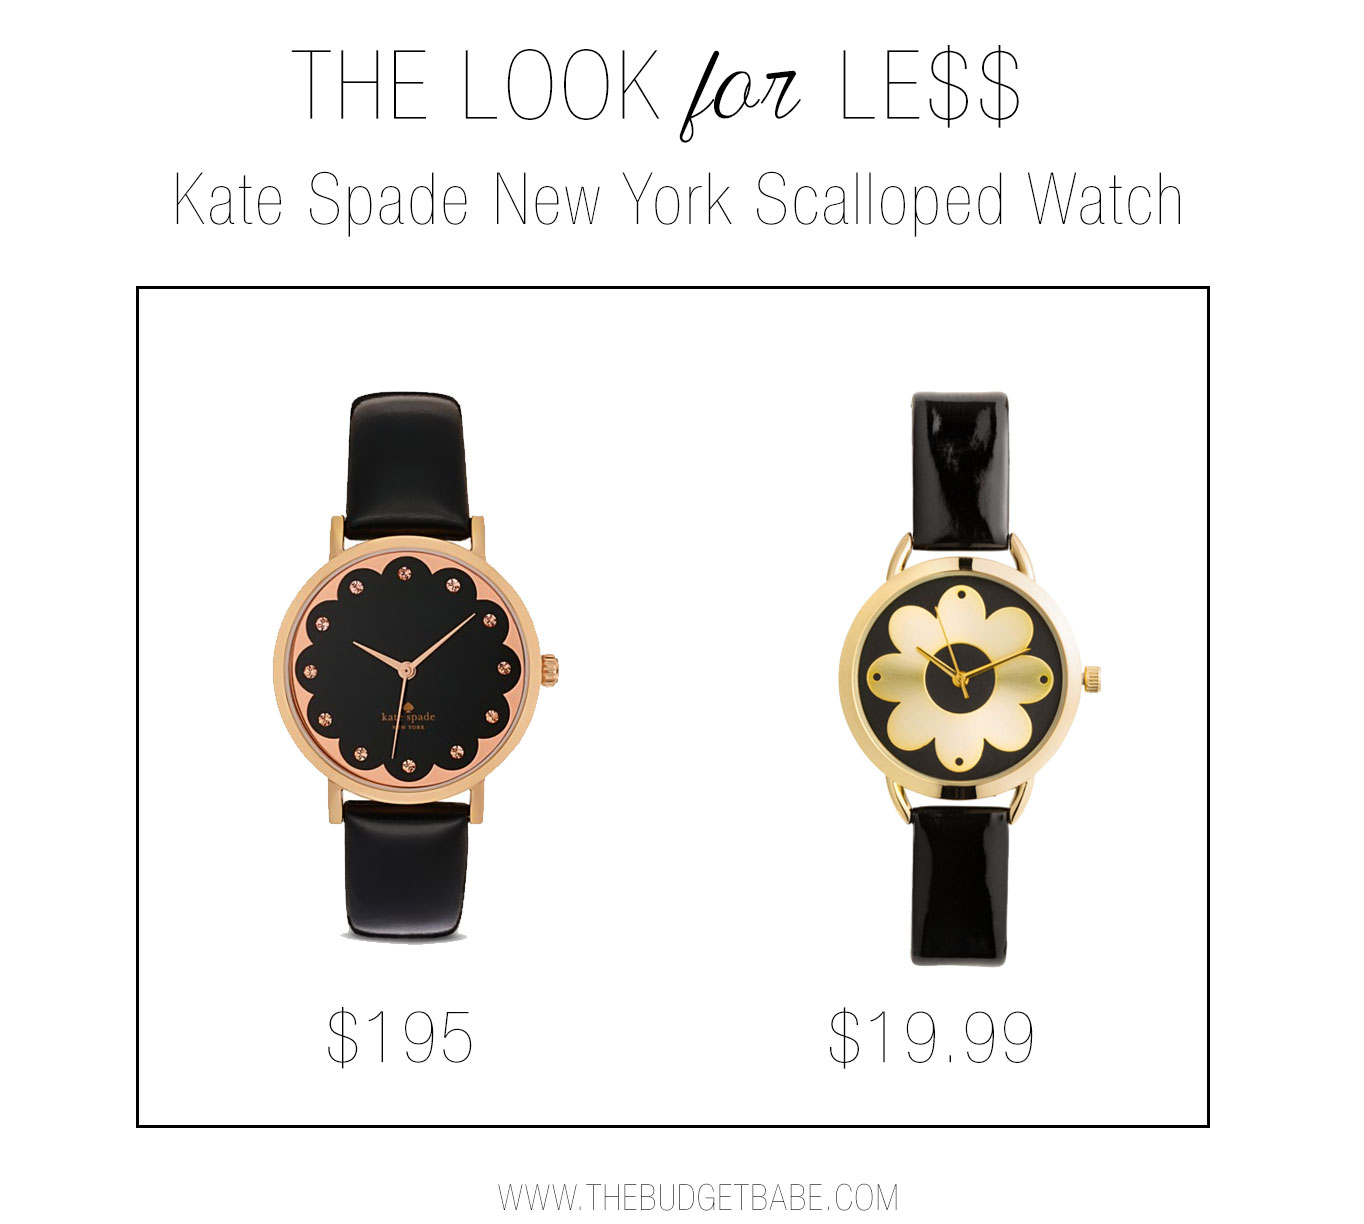 The Look for Less: Kate Spade Scalloped Watch